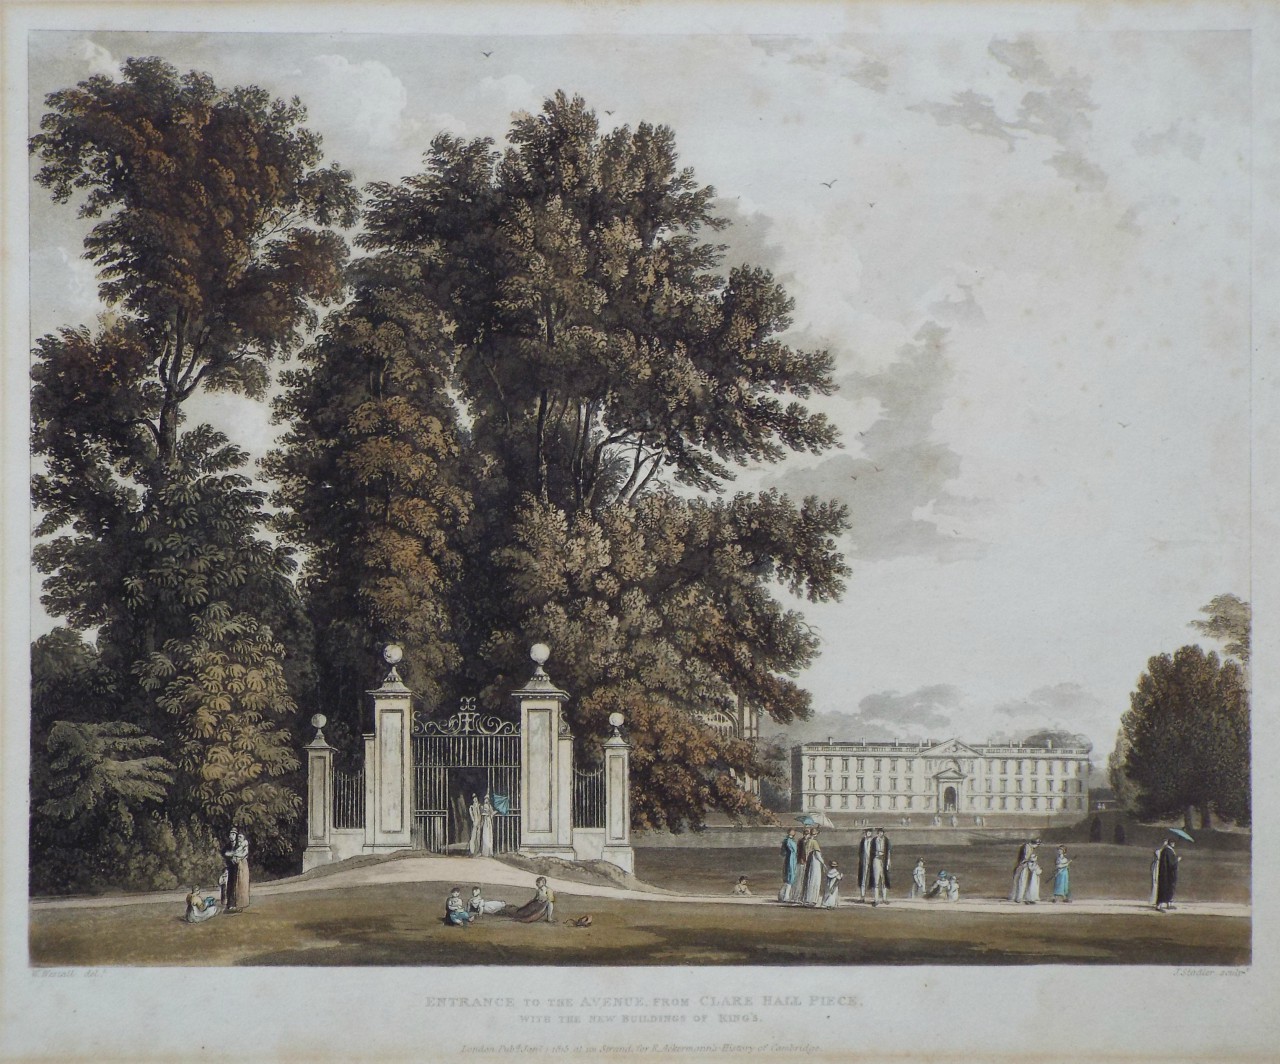 Aquatint - Entrance to the Avenue, from Clare Hall Piece, with the New Buildings of King's. - Stadler